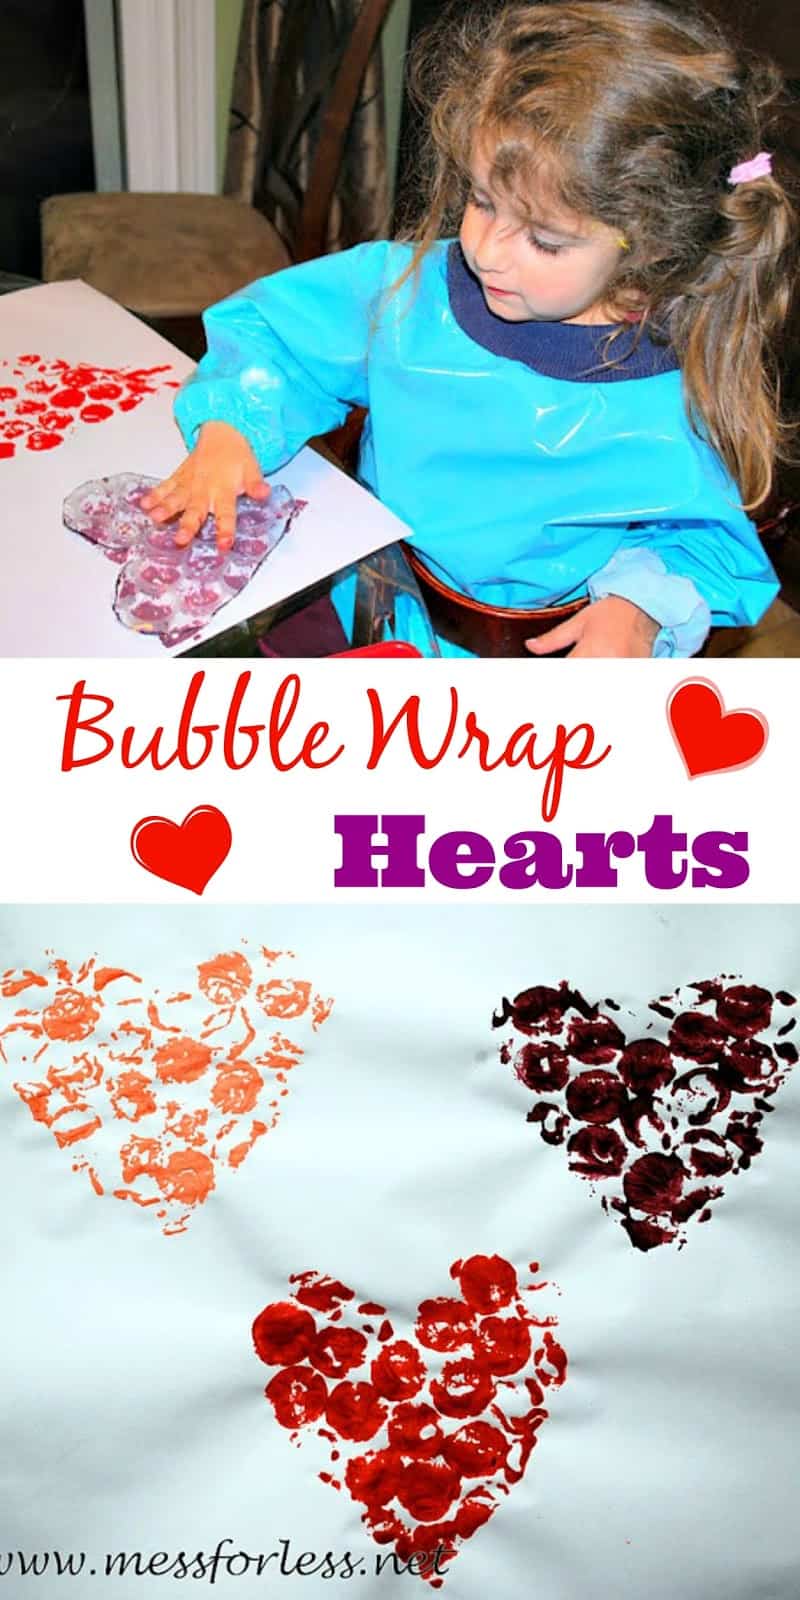 Bubble Wrap Hearts - don't throw out that bubble wrap. Cut it into heart shapes and combine with paint for a fun art experience.